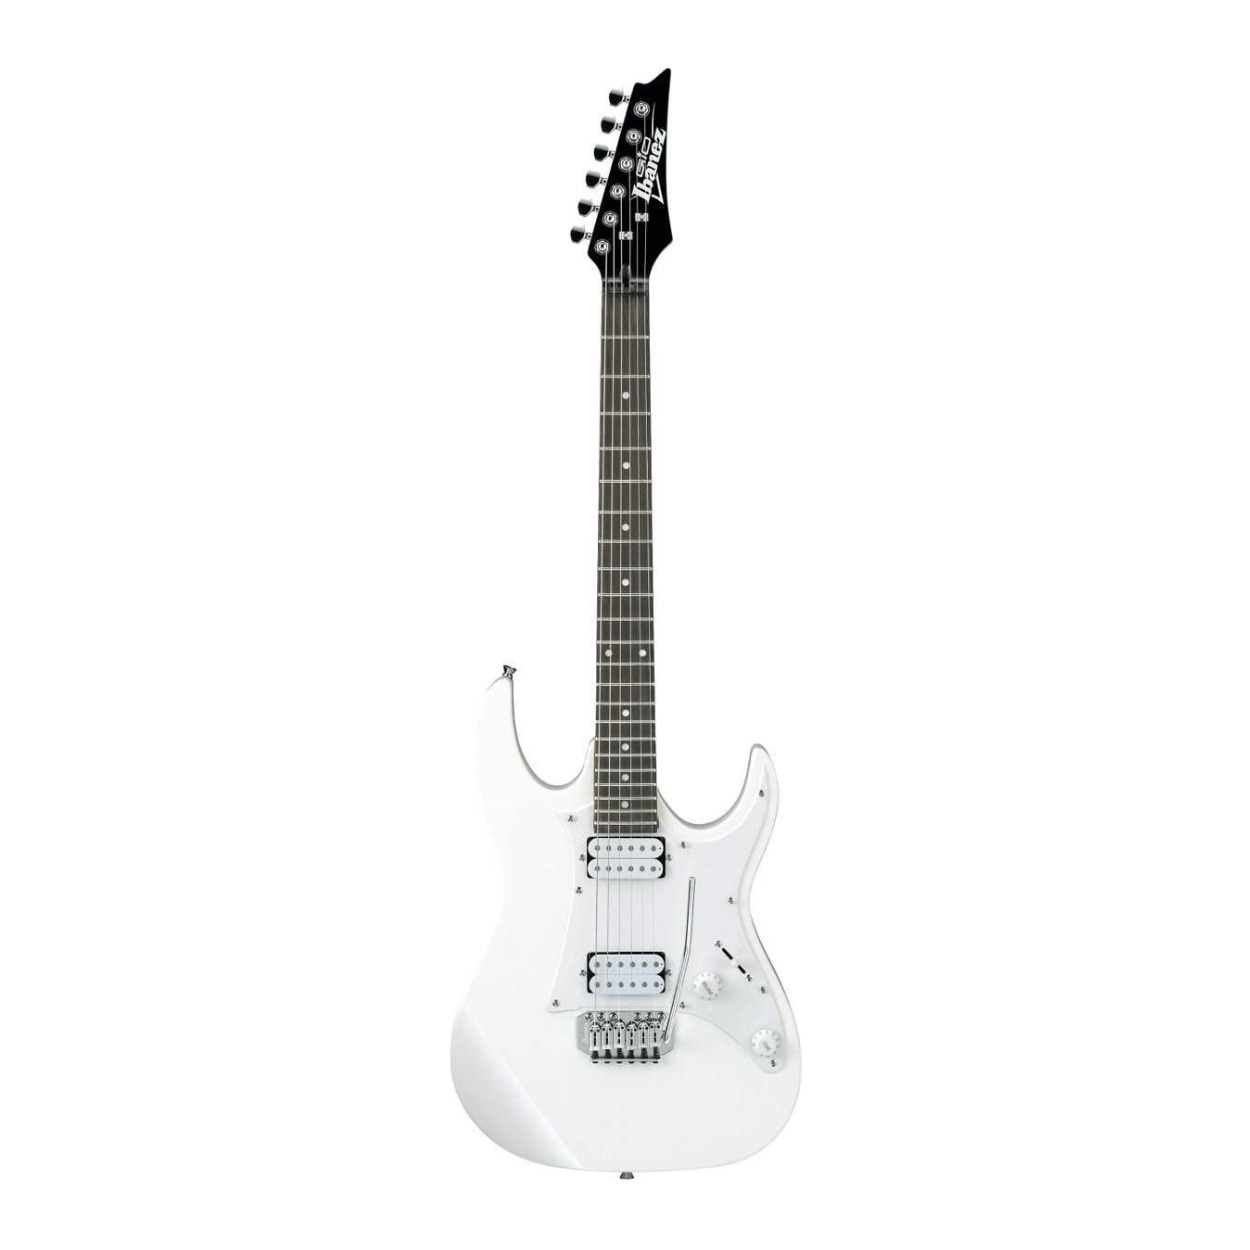 Ibanez GIO RX 6-String Electric Guitar (Right Hand, White) -  GRX20WWH